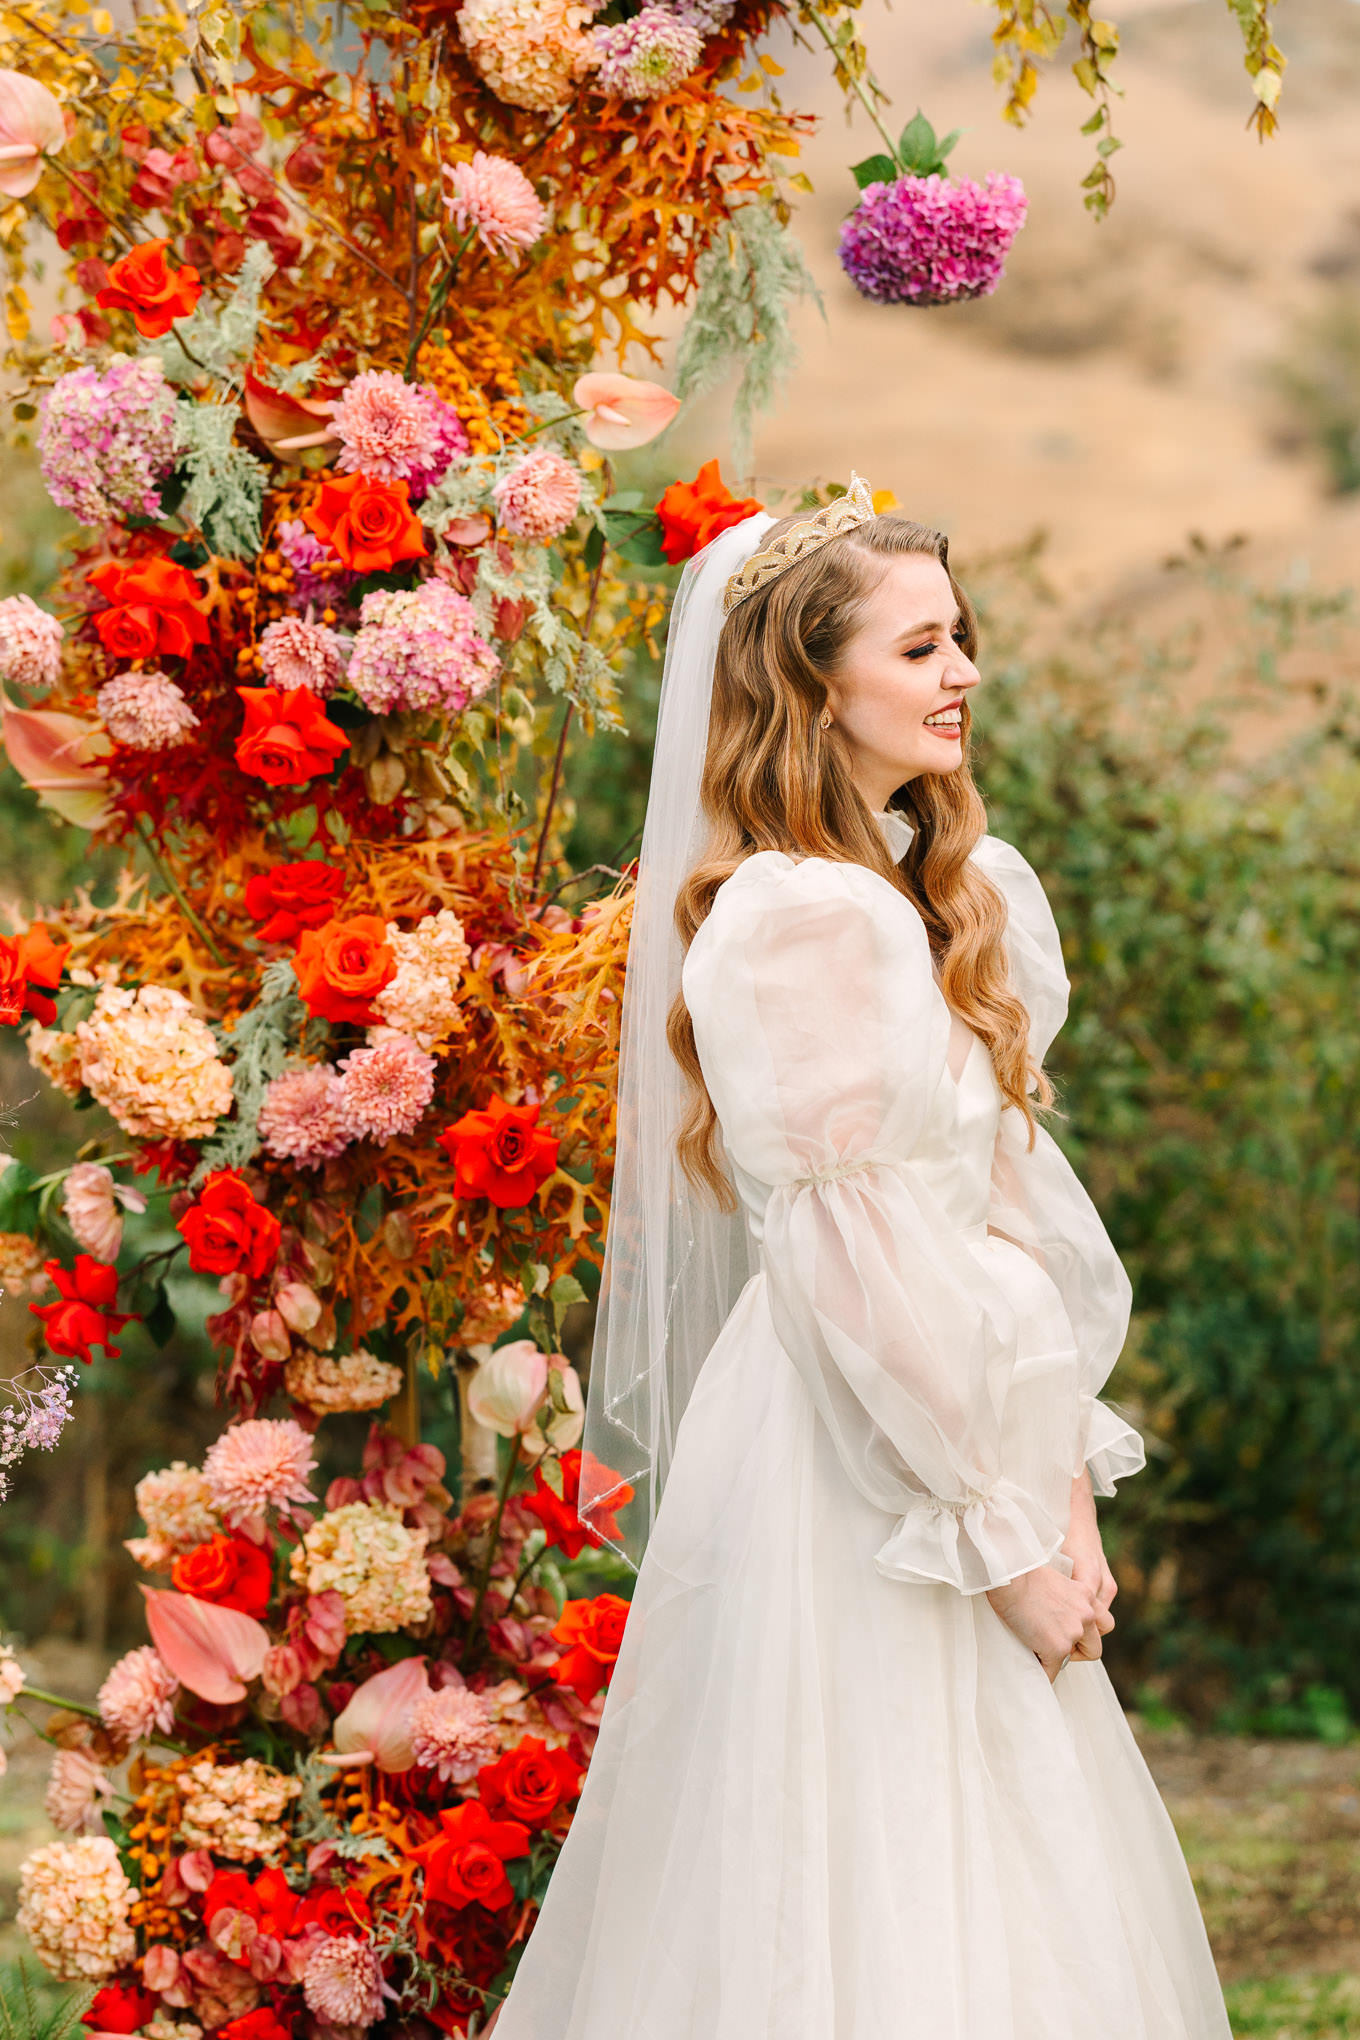 Allison Harvard & Jeremy Burke's floral-filled wedding ceremony | Colorful and quirky wedding at Higuera Ranch in San Luis Obispo | #sanluisobispowedding #californiawedding #higueraranch #madonnainn   
Source: Mary Costa Photography | Los Angeles